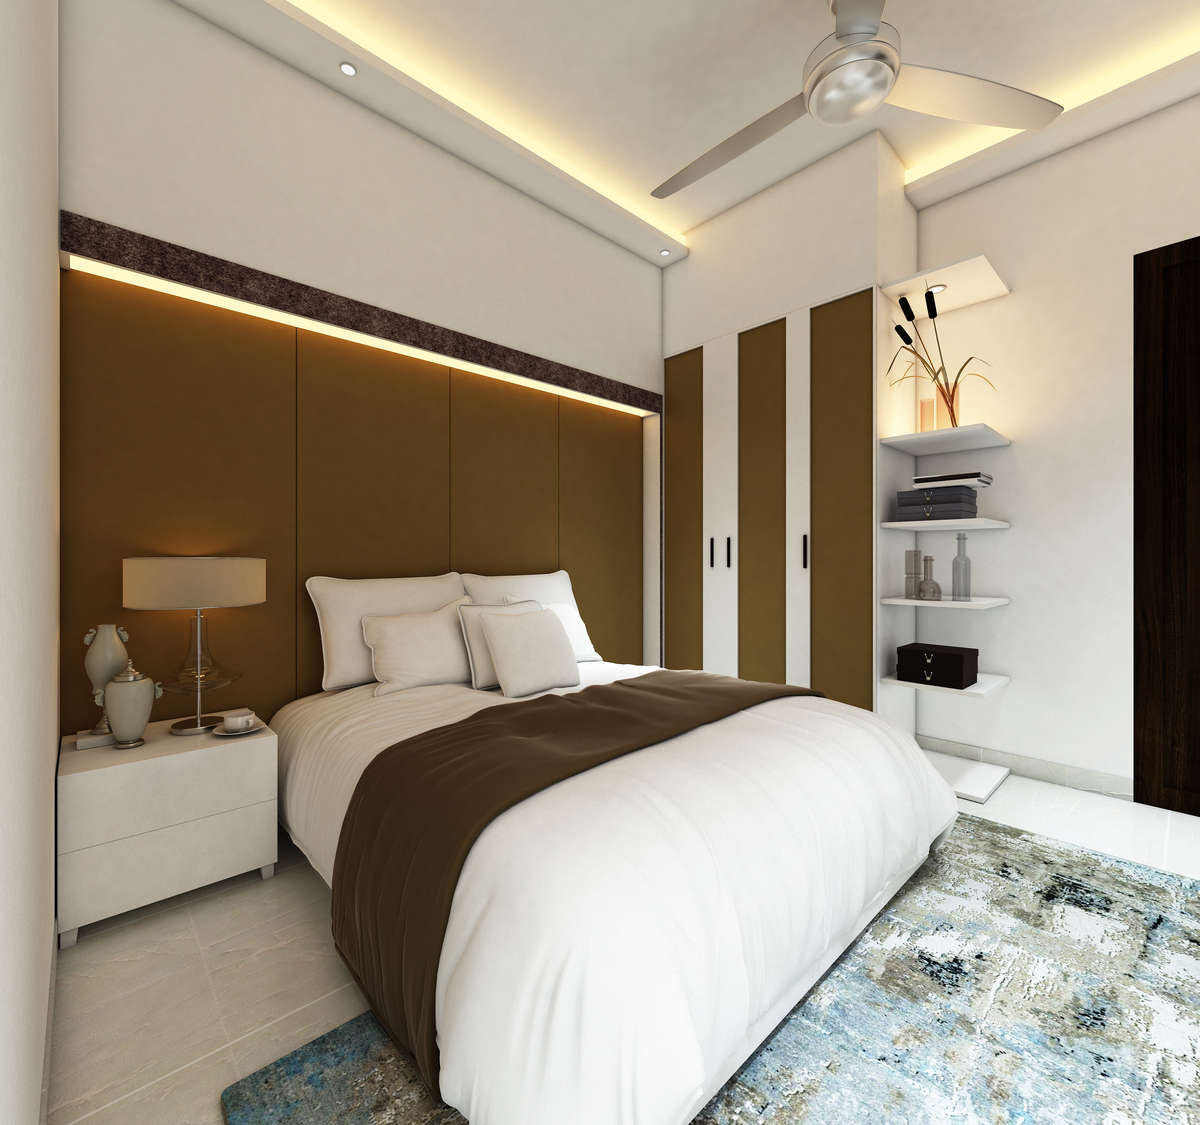 Bed room interior 
Contact for interior designing